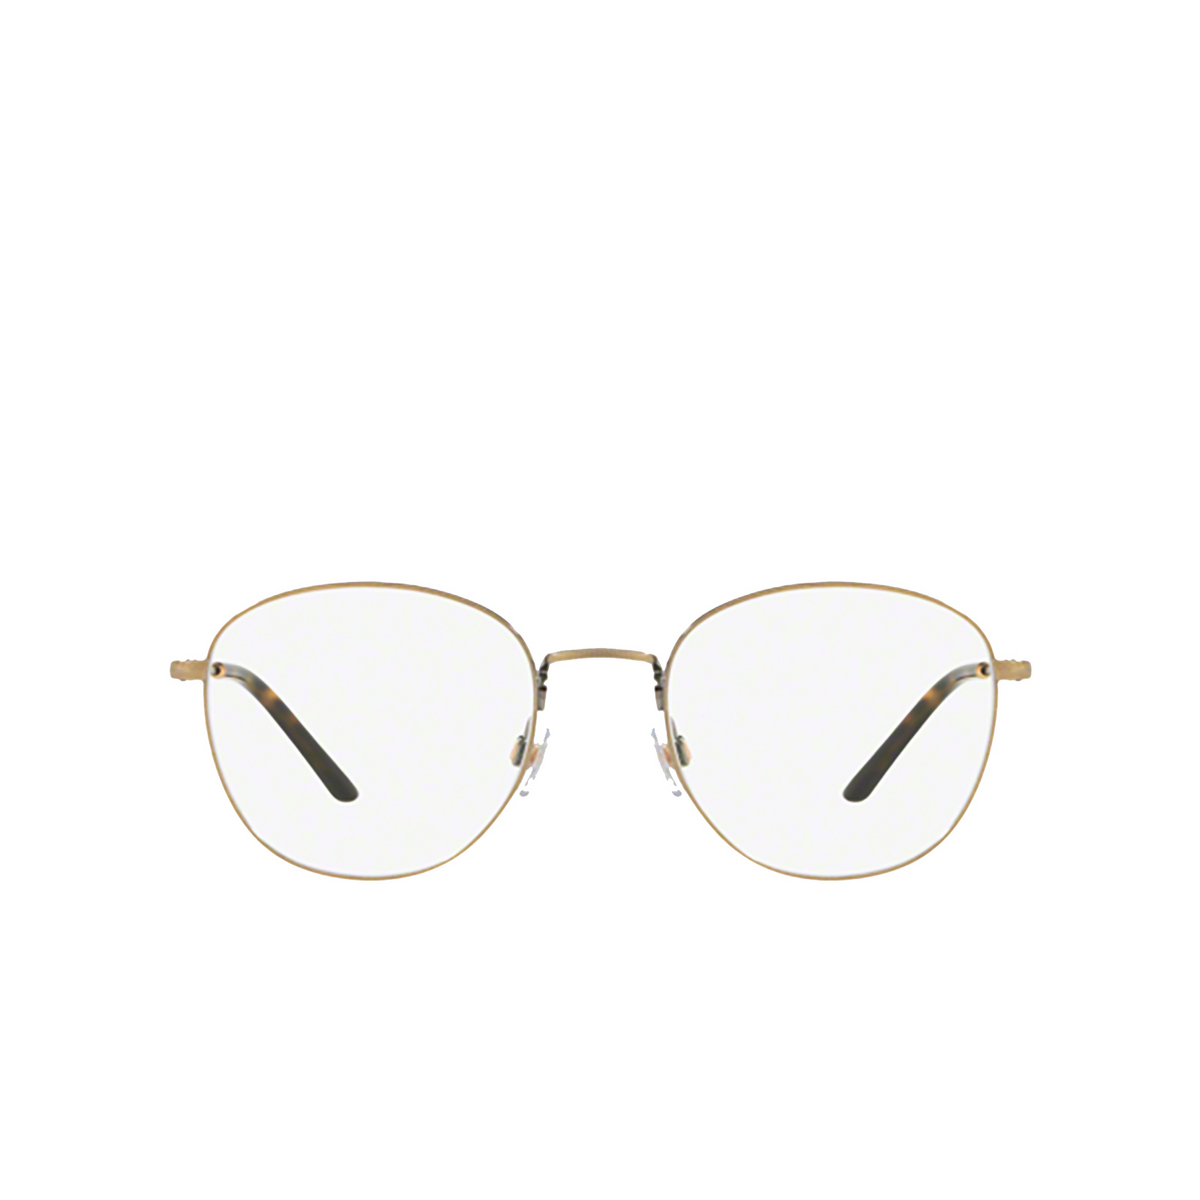 Giorgio Armani AR5082 Eyeglasses 3198 BRUSHED GOLD - front view